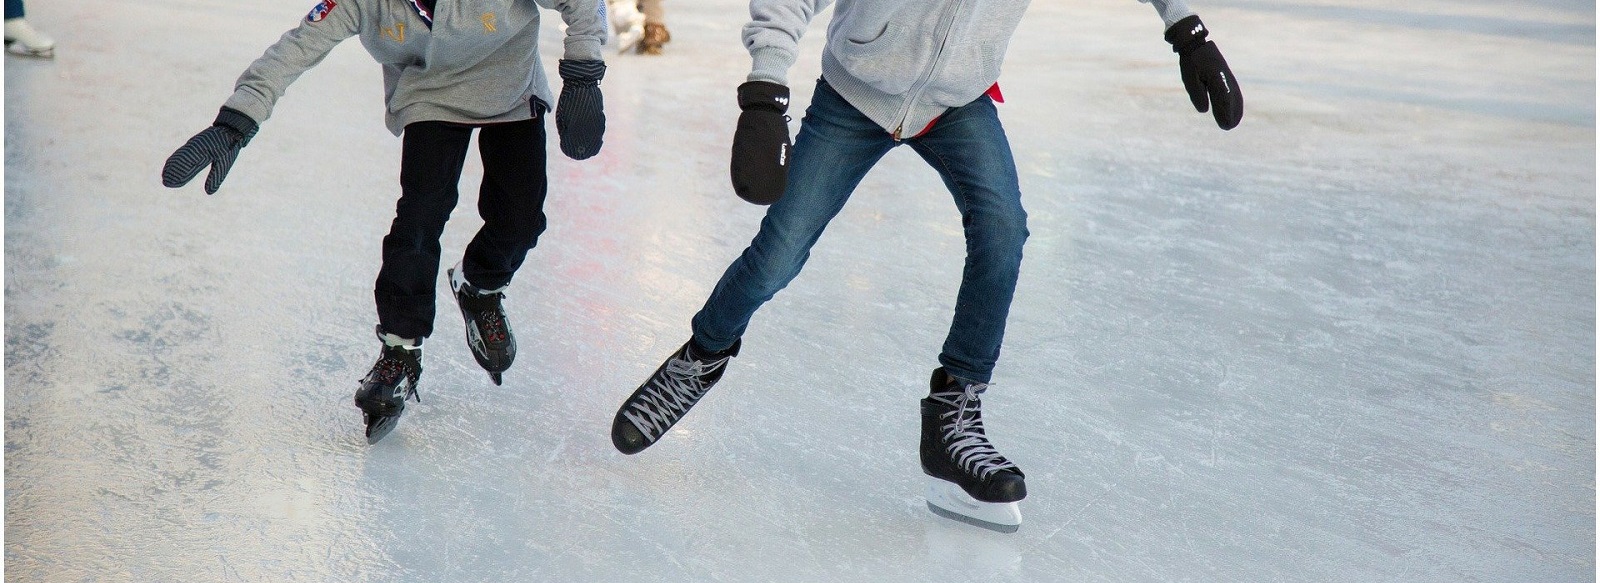 Two people skating on ice